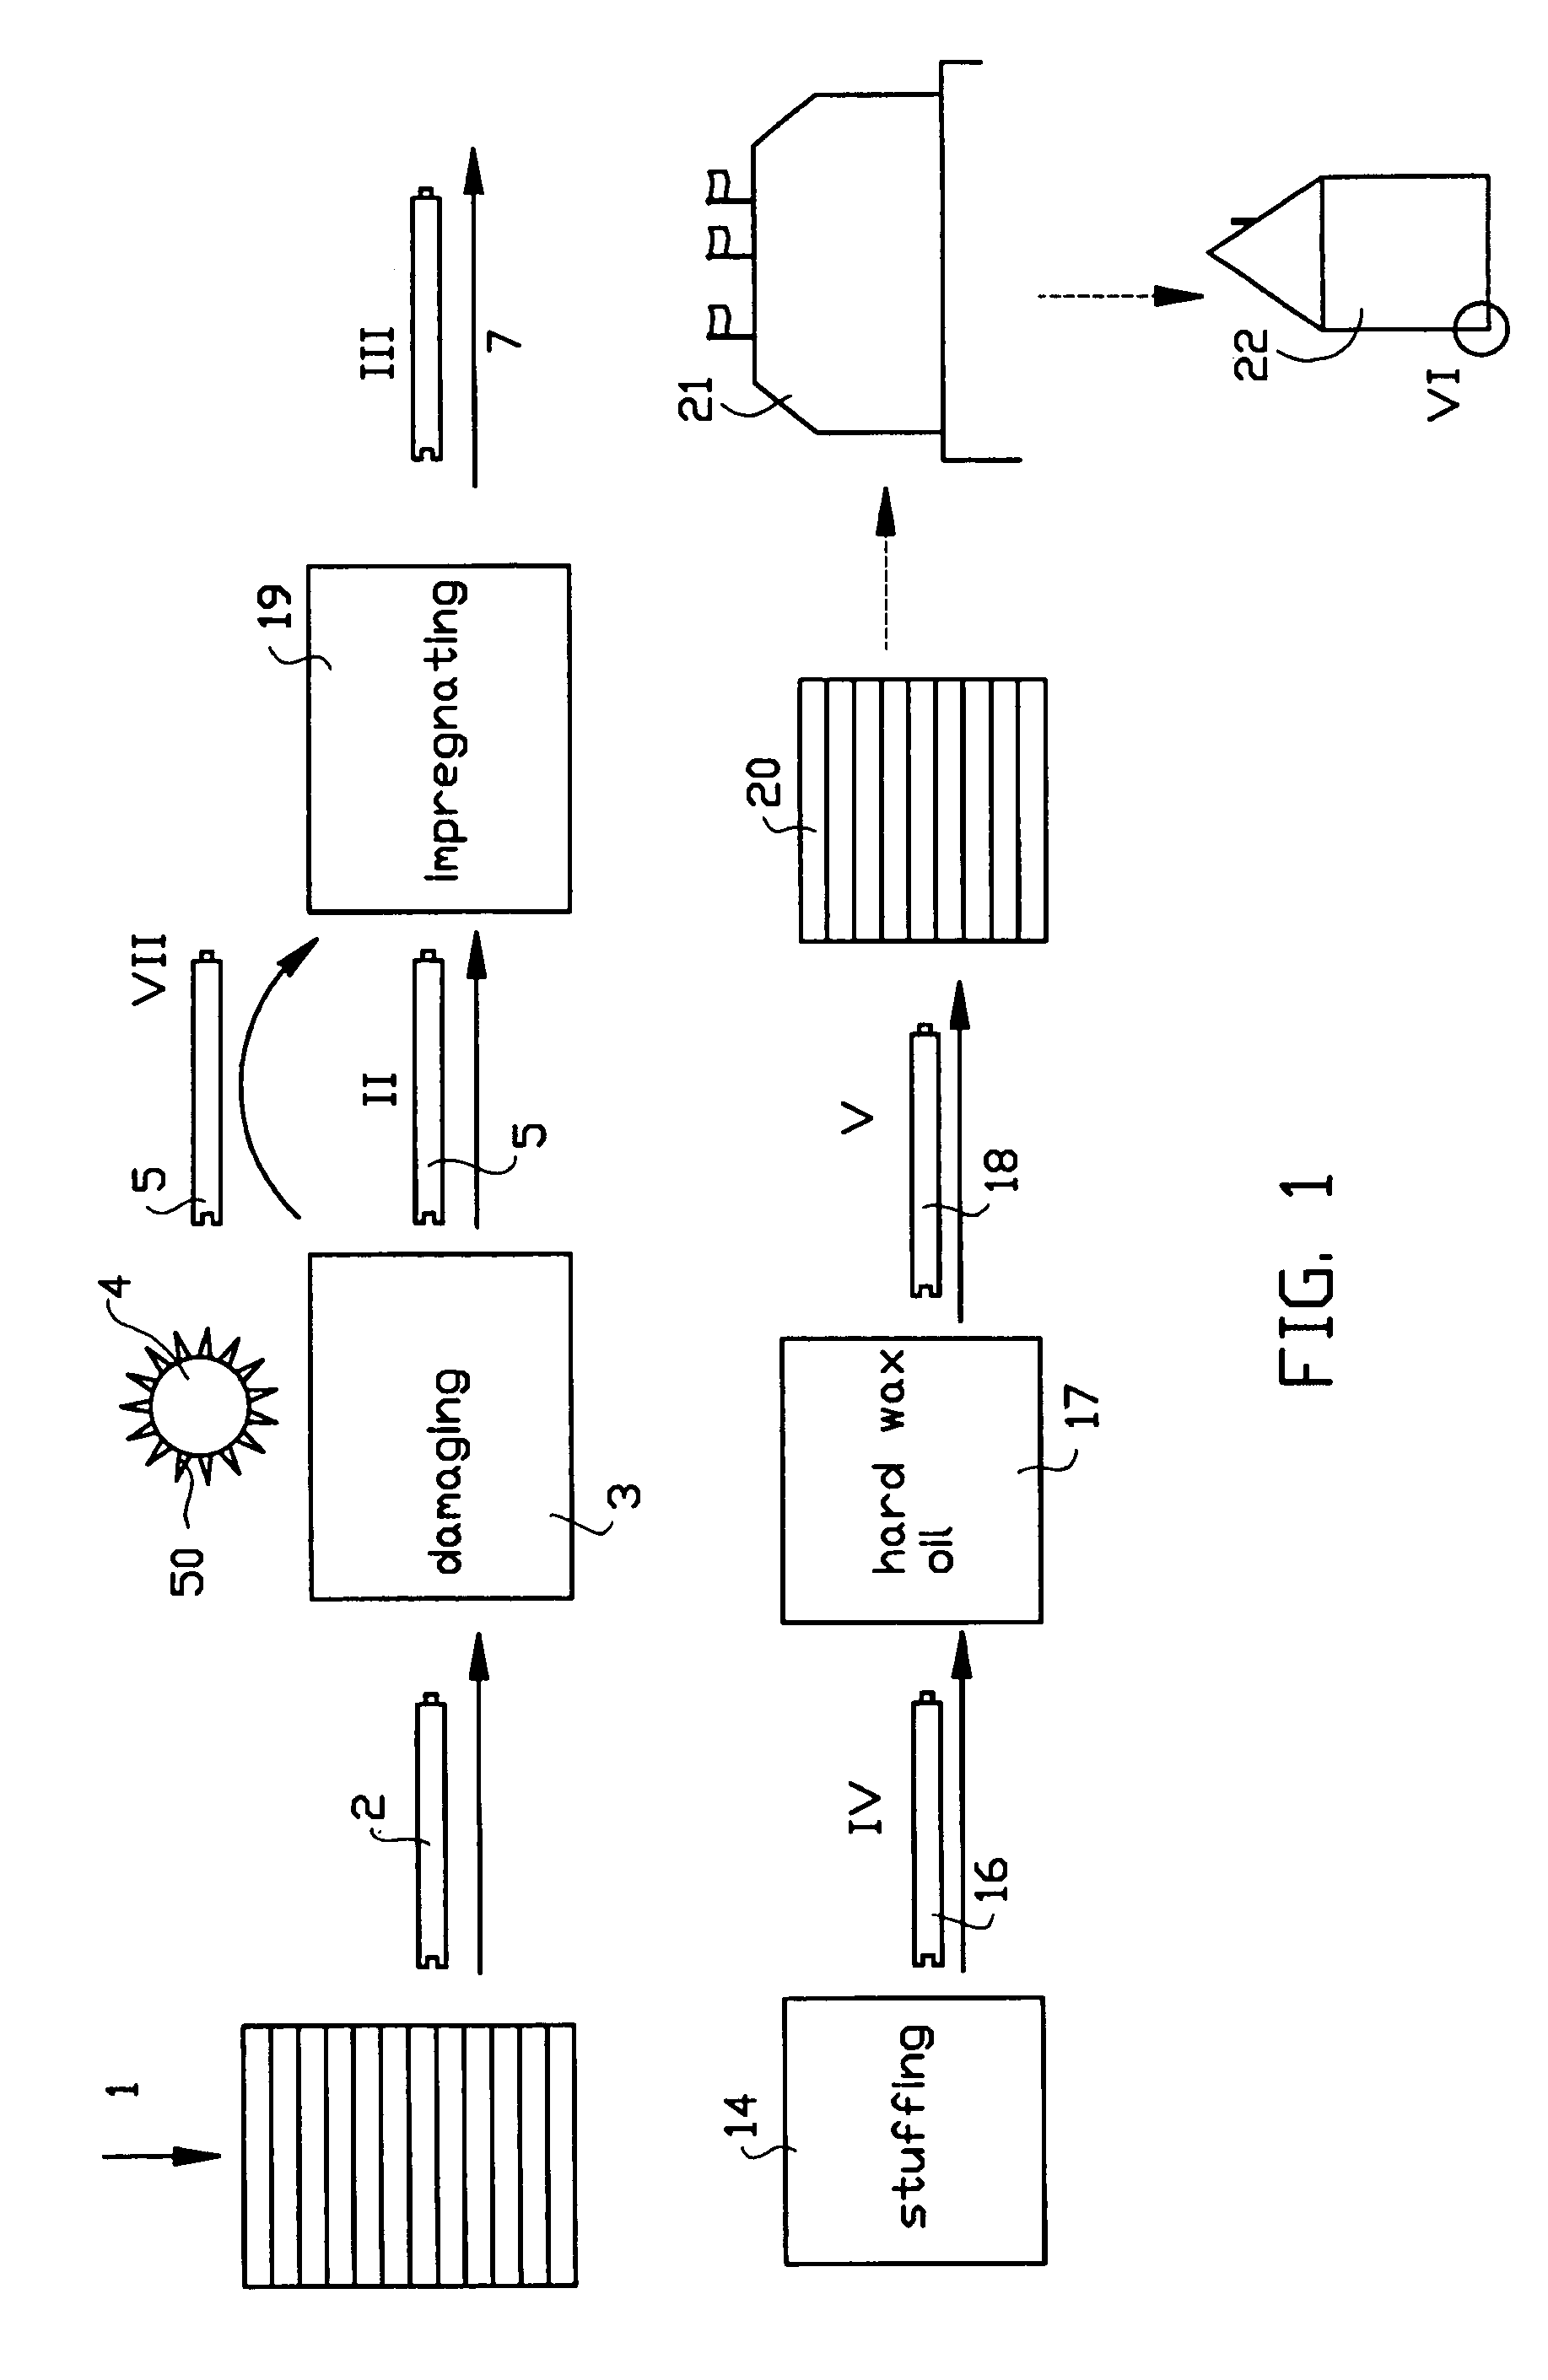 Method for manufacturing floor boards